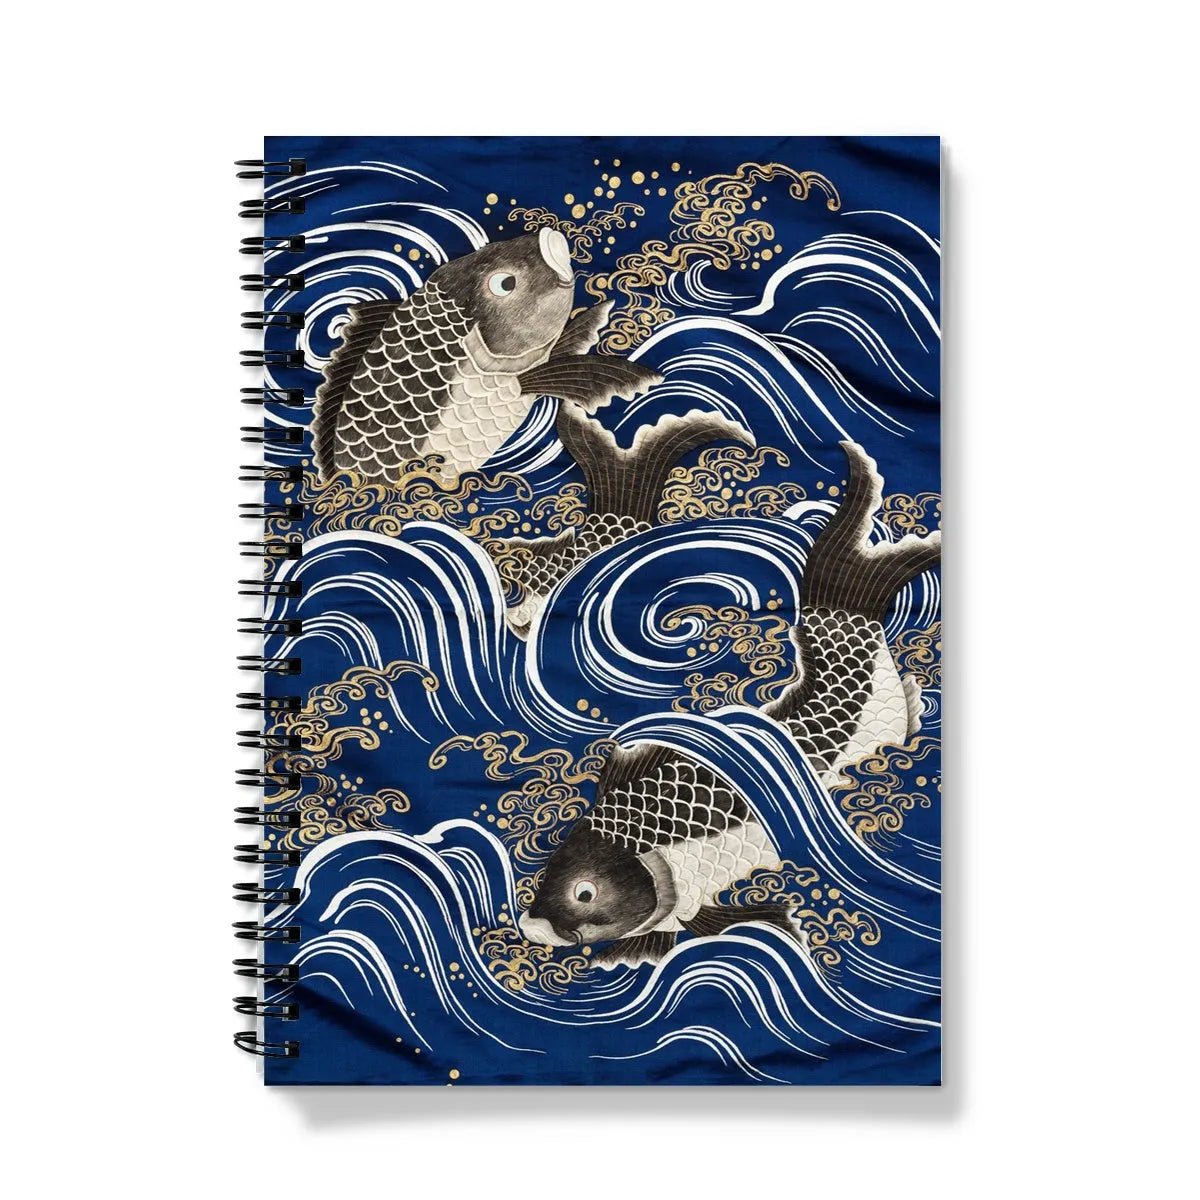 Fukusa And Carp In Waves - Meiji Period Art Notebook - A5 / Graph - Notebooks & Notepads - Aesthetic Art